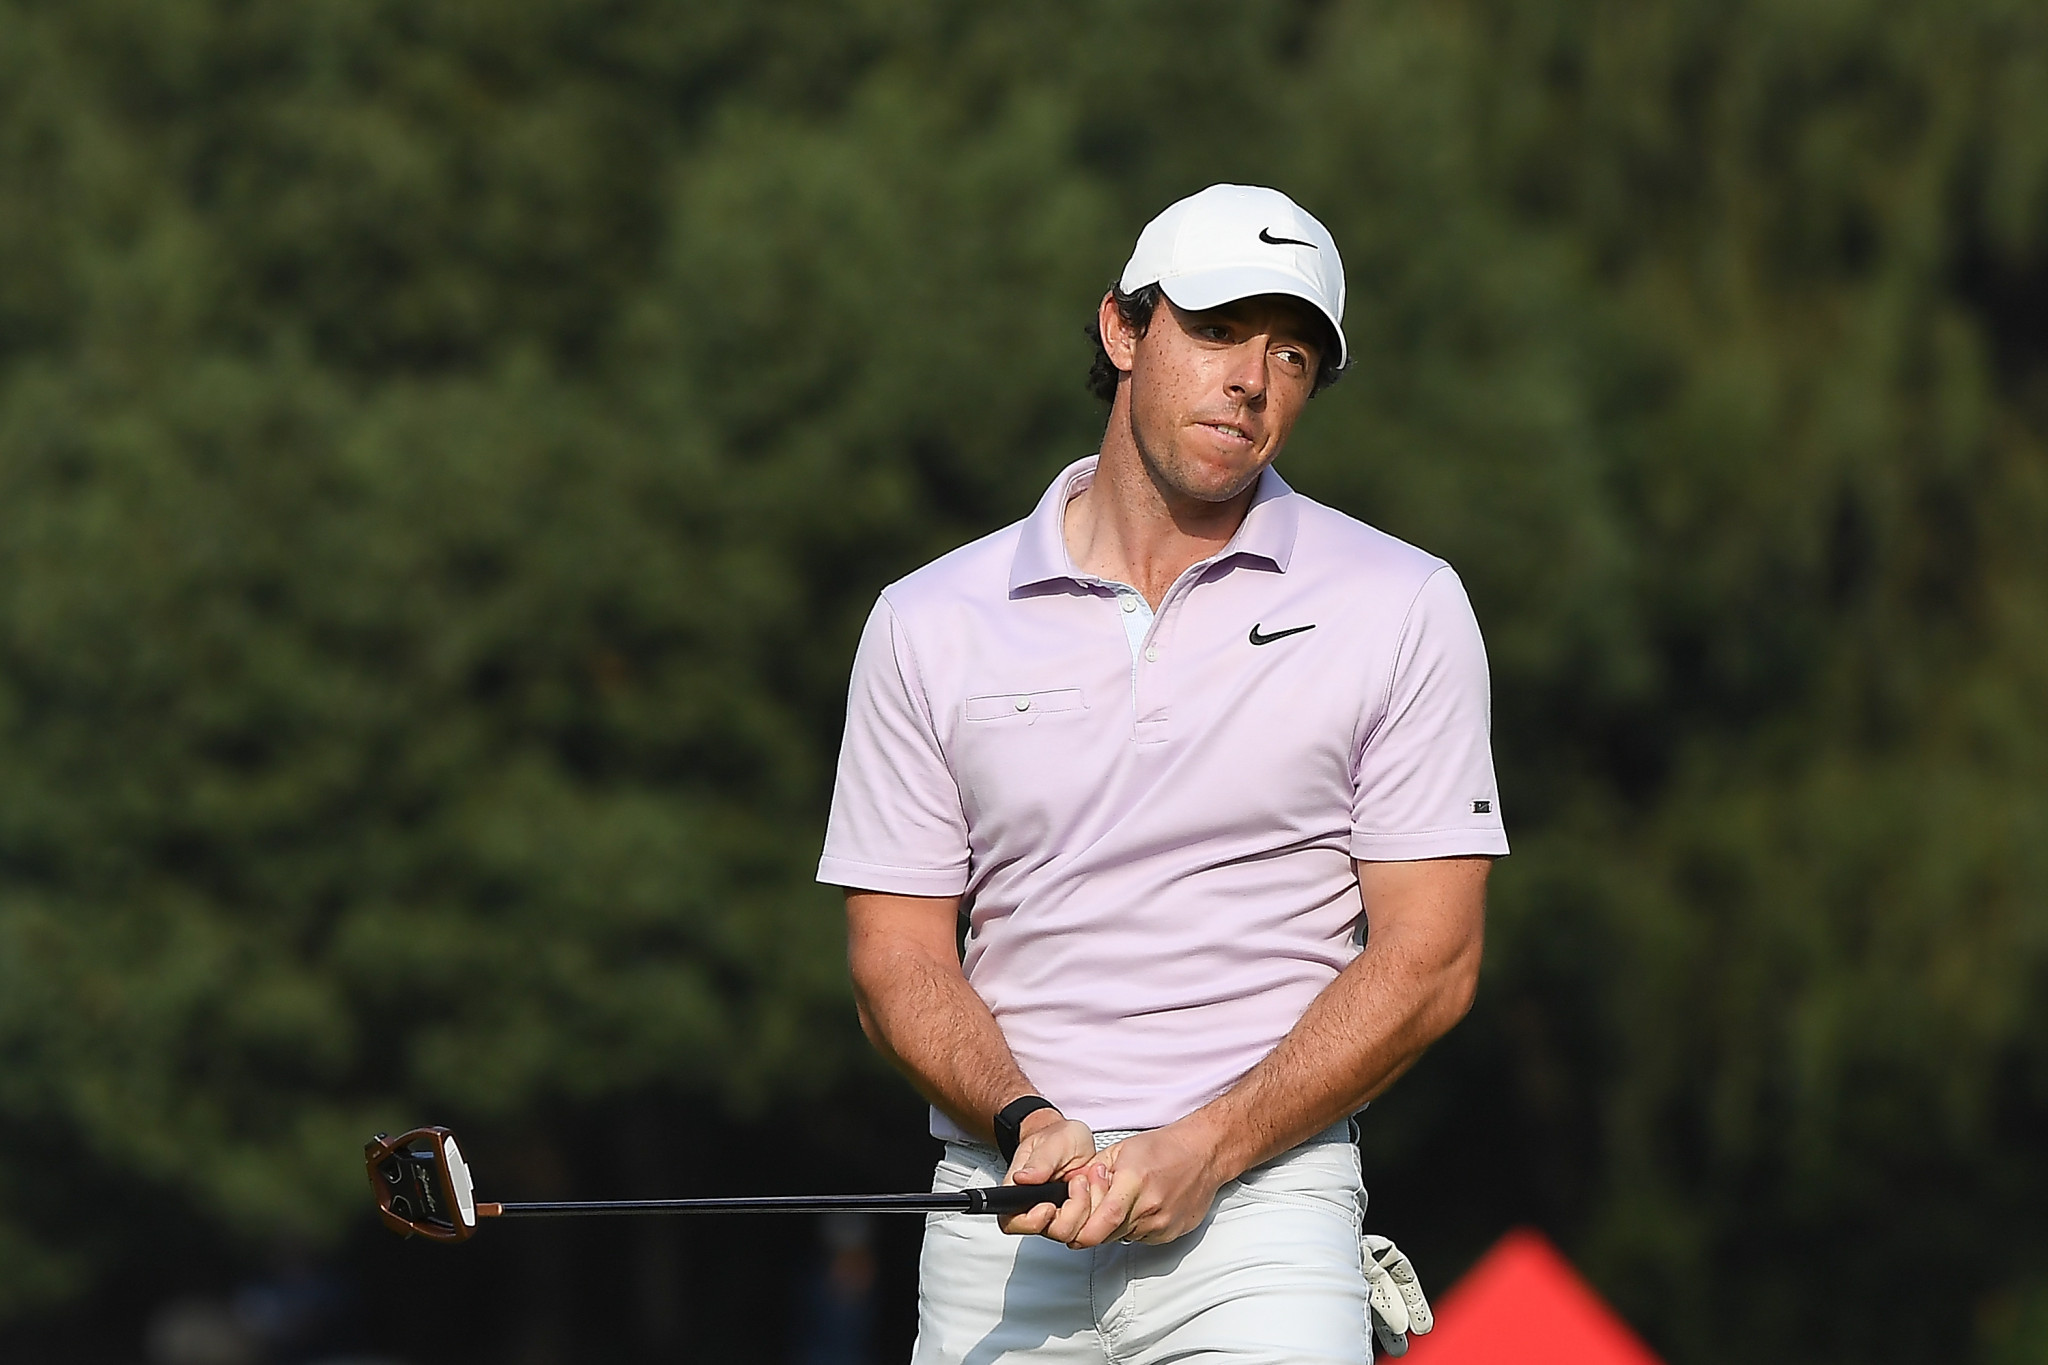 Rory McIlroy has a one-shot lead going into the final round ©Getty Images